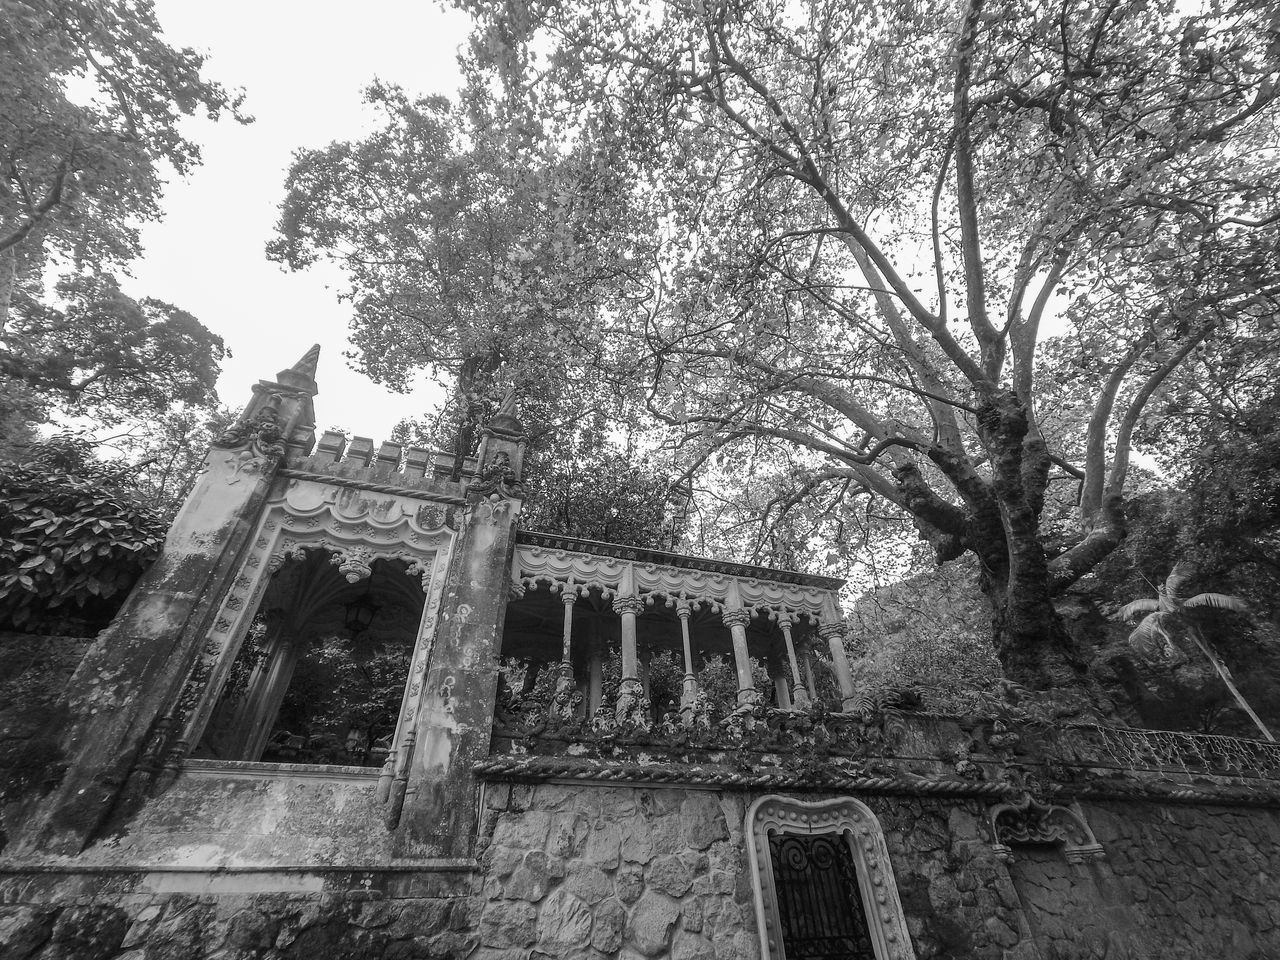 tree, architecture, plant, built structure, black and white, history, building exterior, low angle view, the past, nature, monochrome photography, no people, day, monochrome, ruins, building, sky, old, branch, abandoned, outdoors, growth, house, old ruin, damaged, travel destinations, religion, place of worship, ancient, rundown